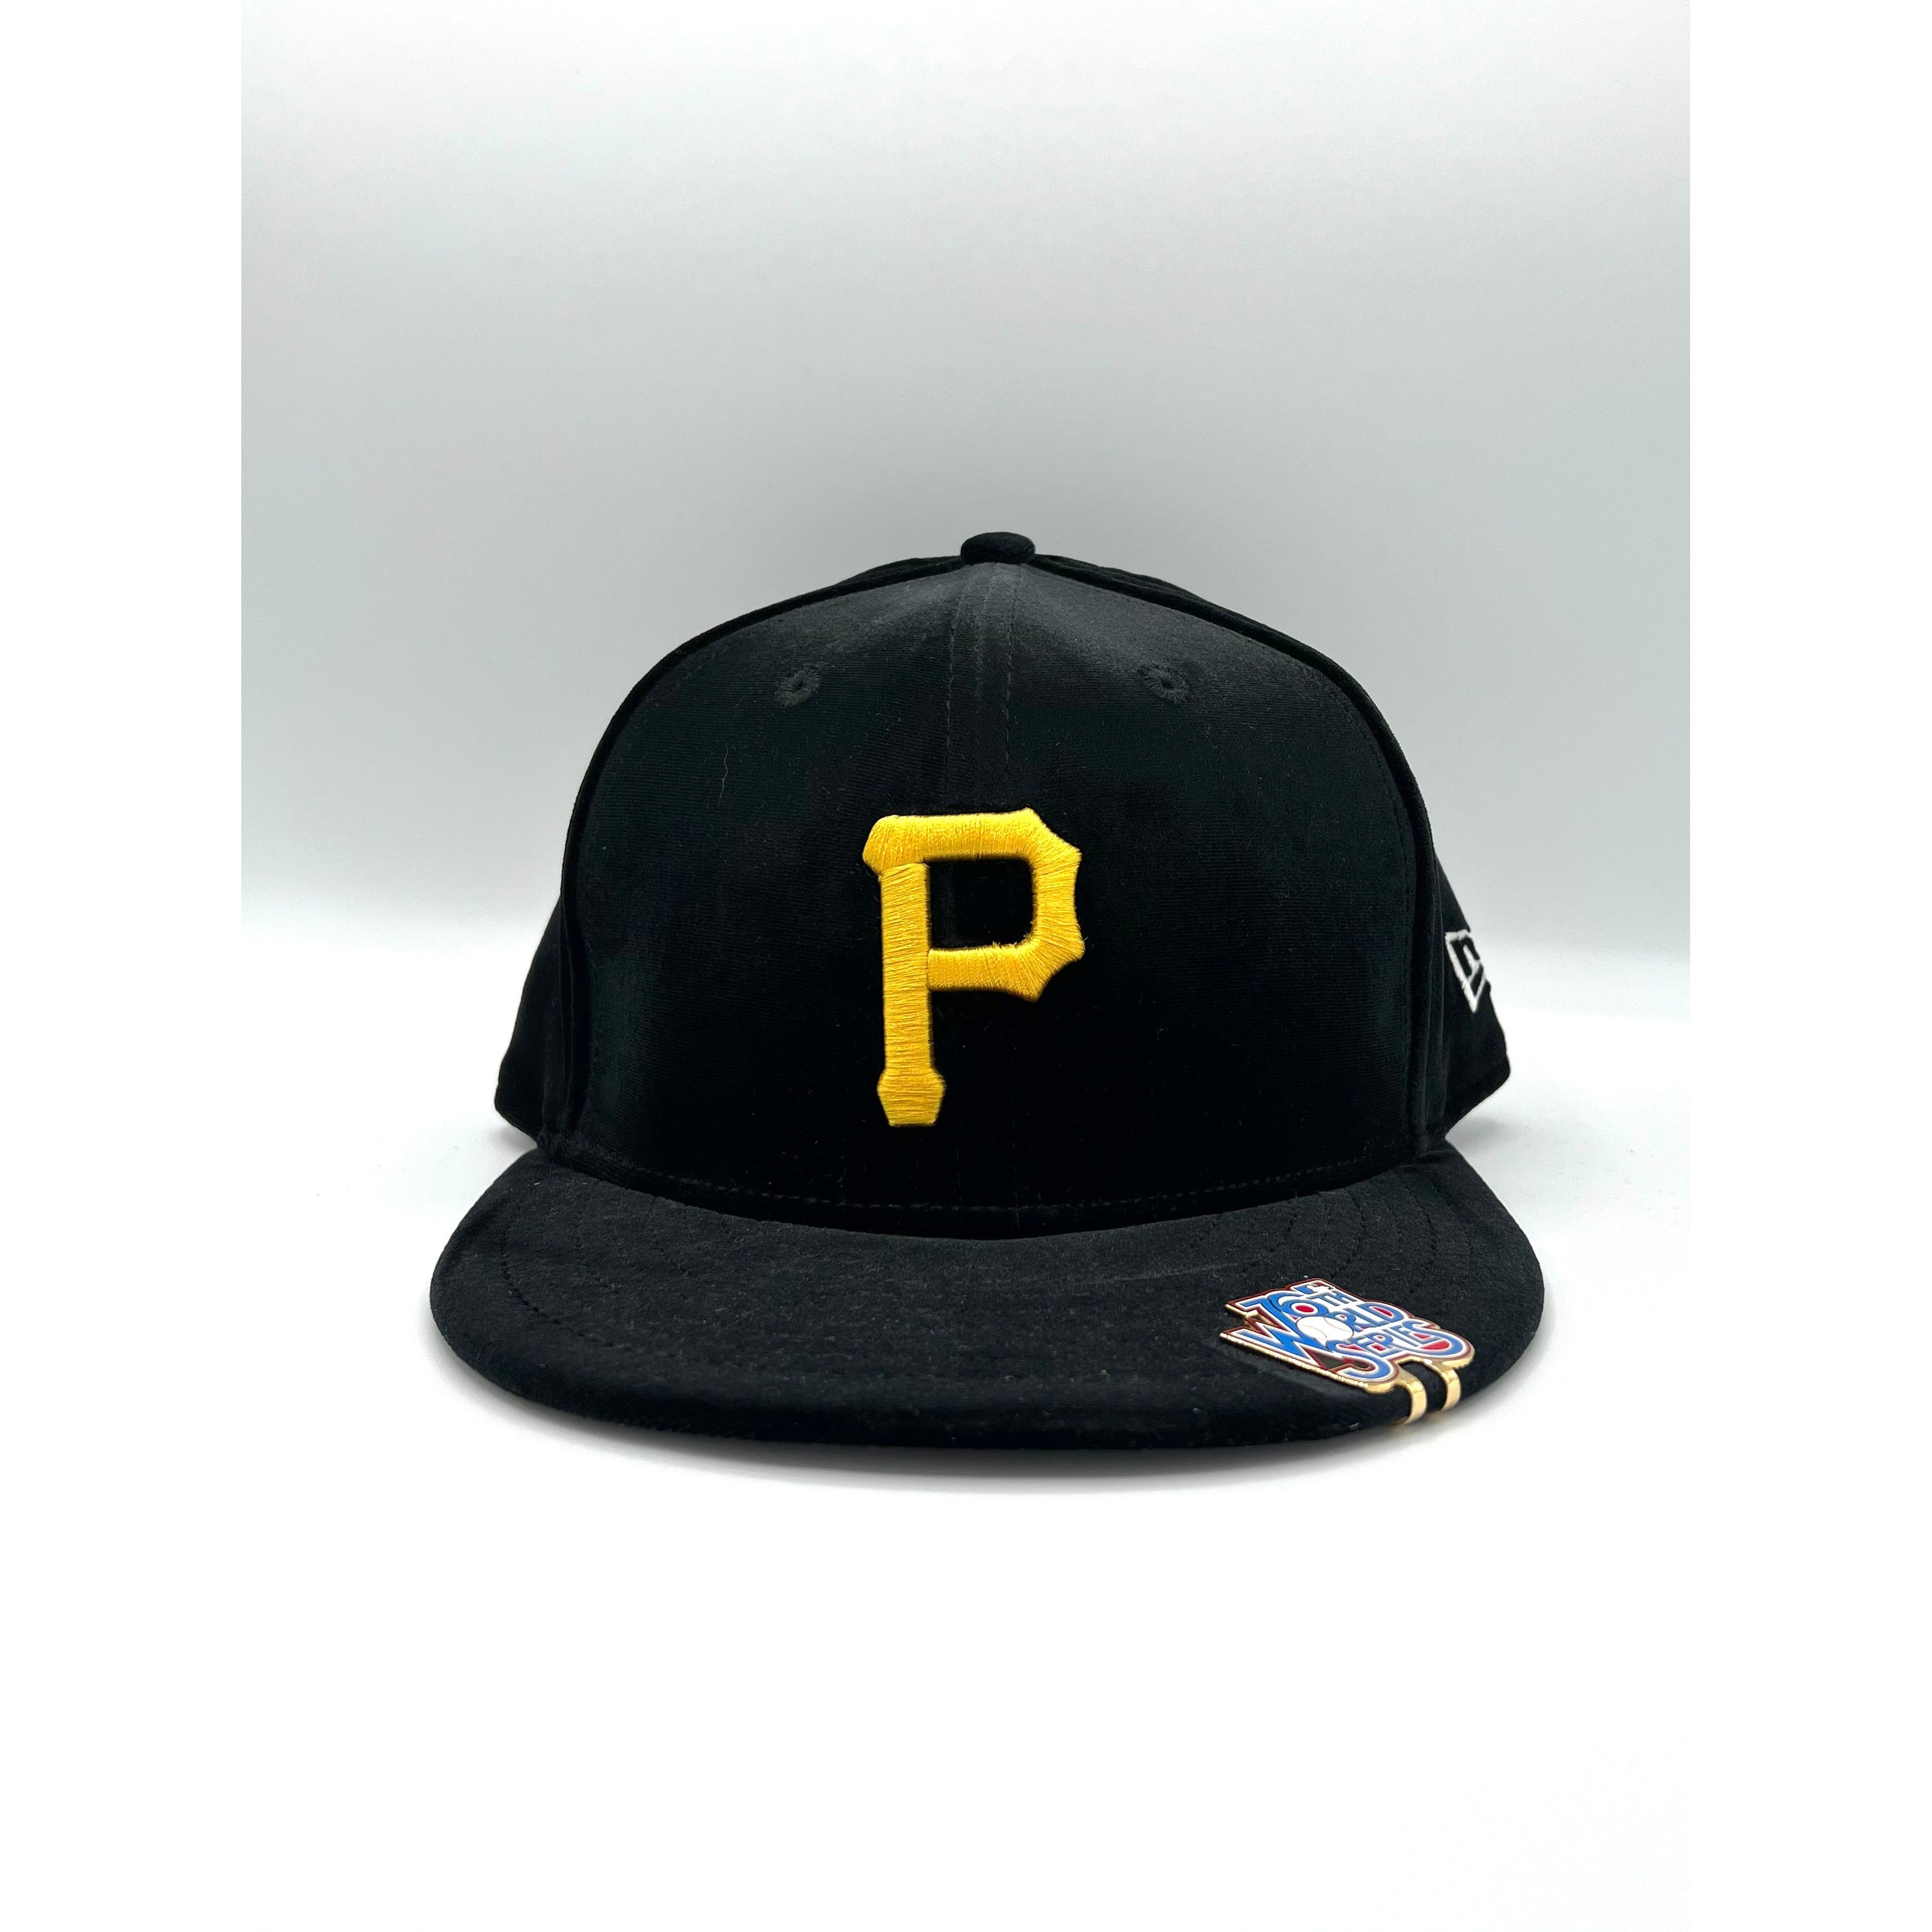 Pittsburgh Pirates Fitted Cap